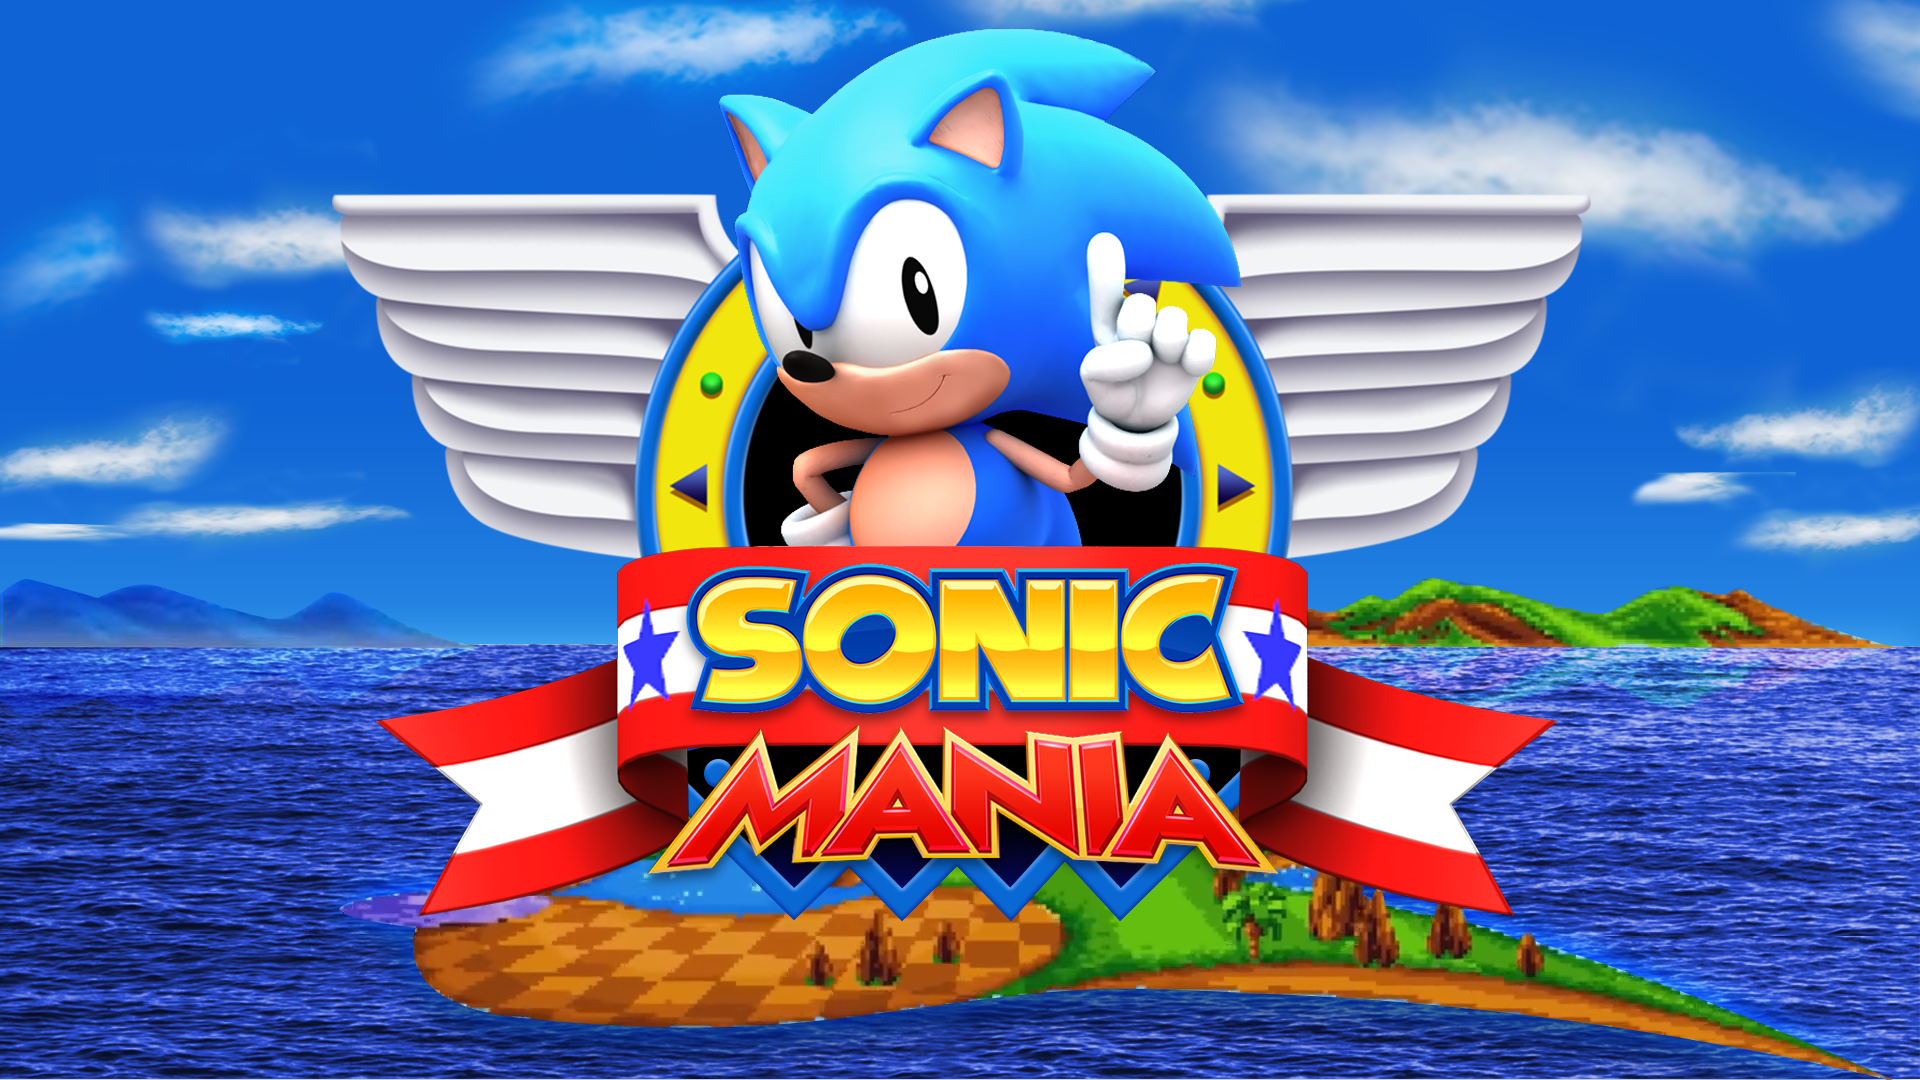 PC / Computer - Sonic Mania - Continue Screen Countdown - The Models  Resource